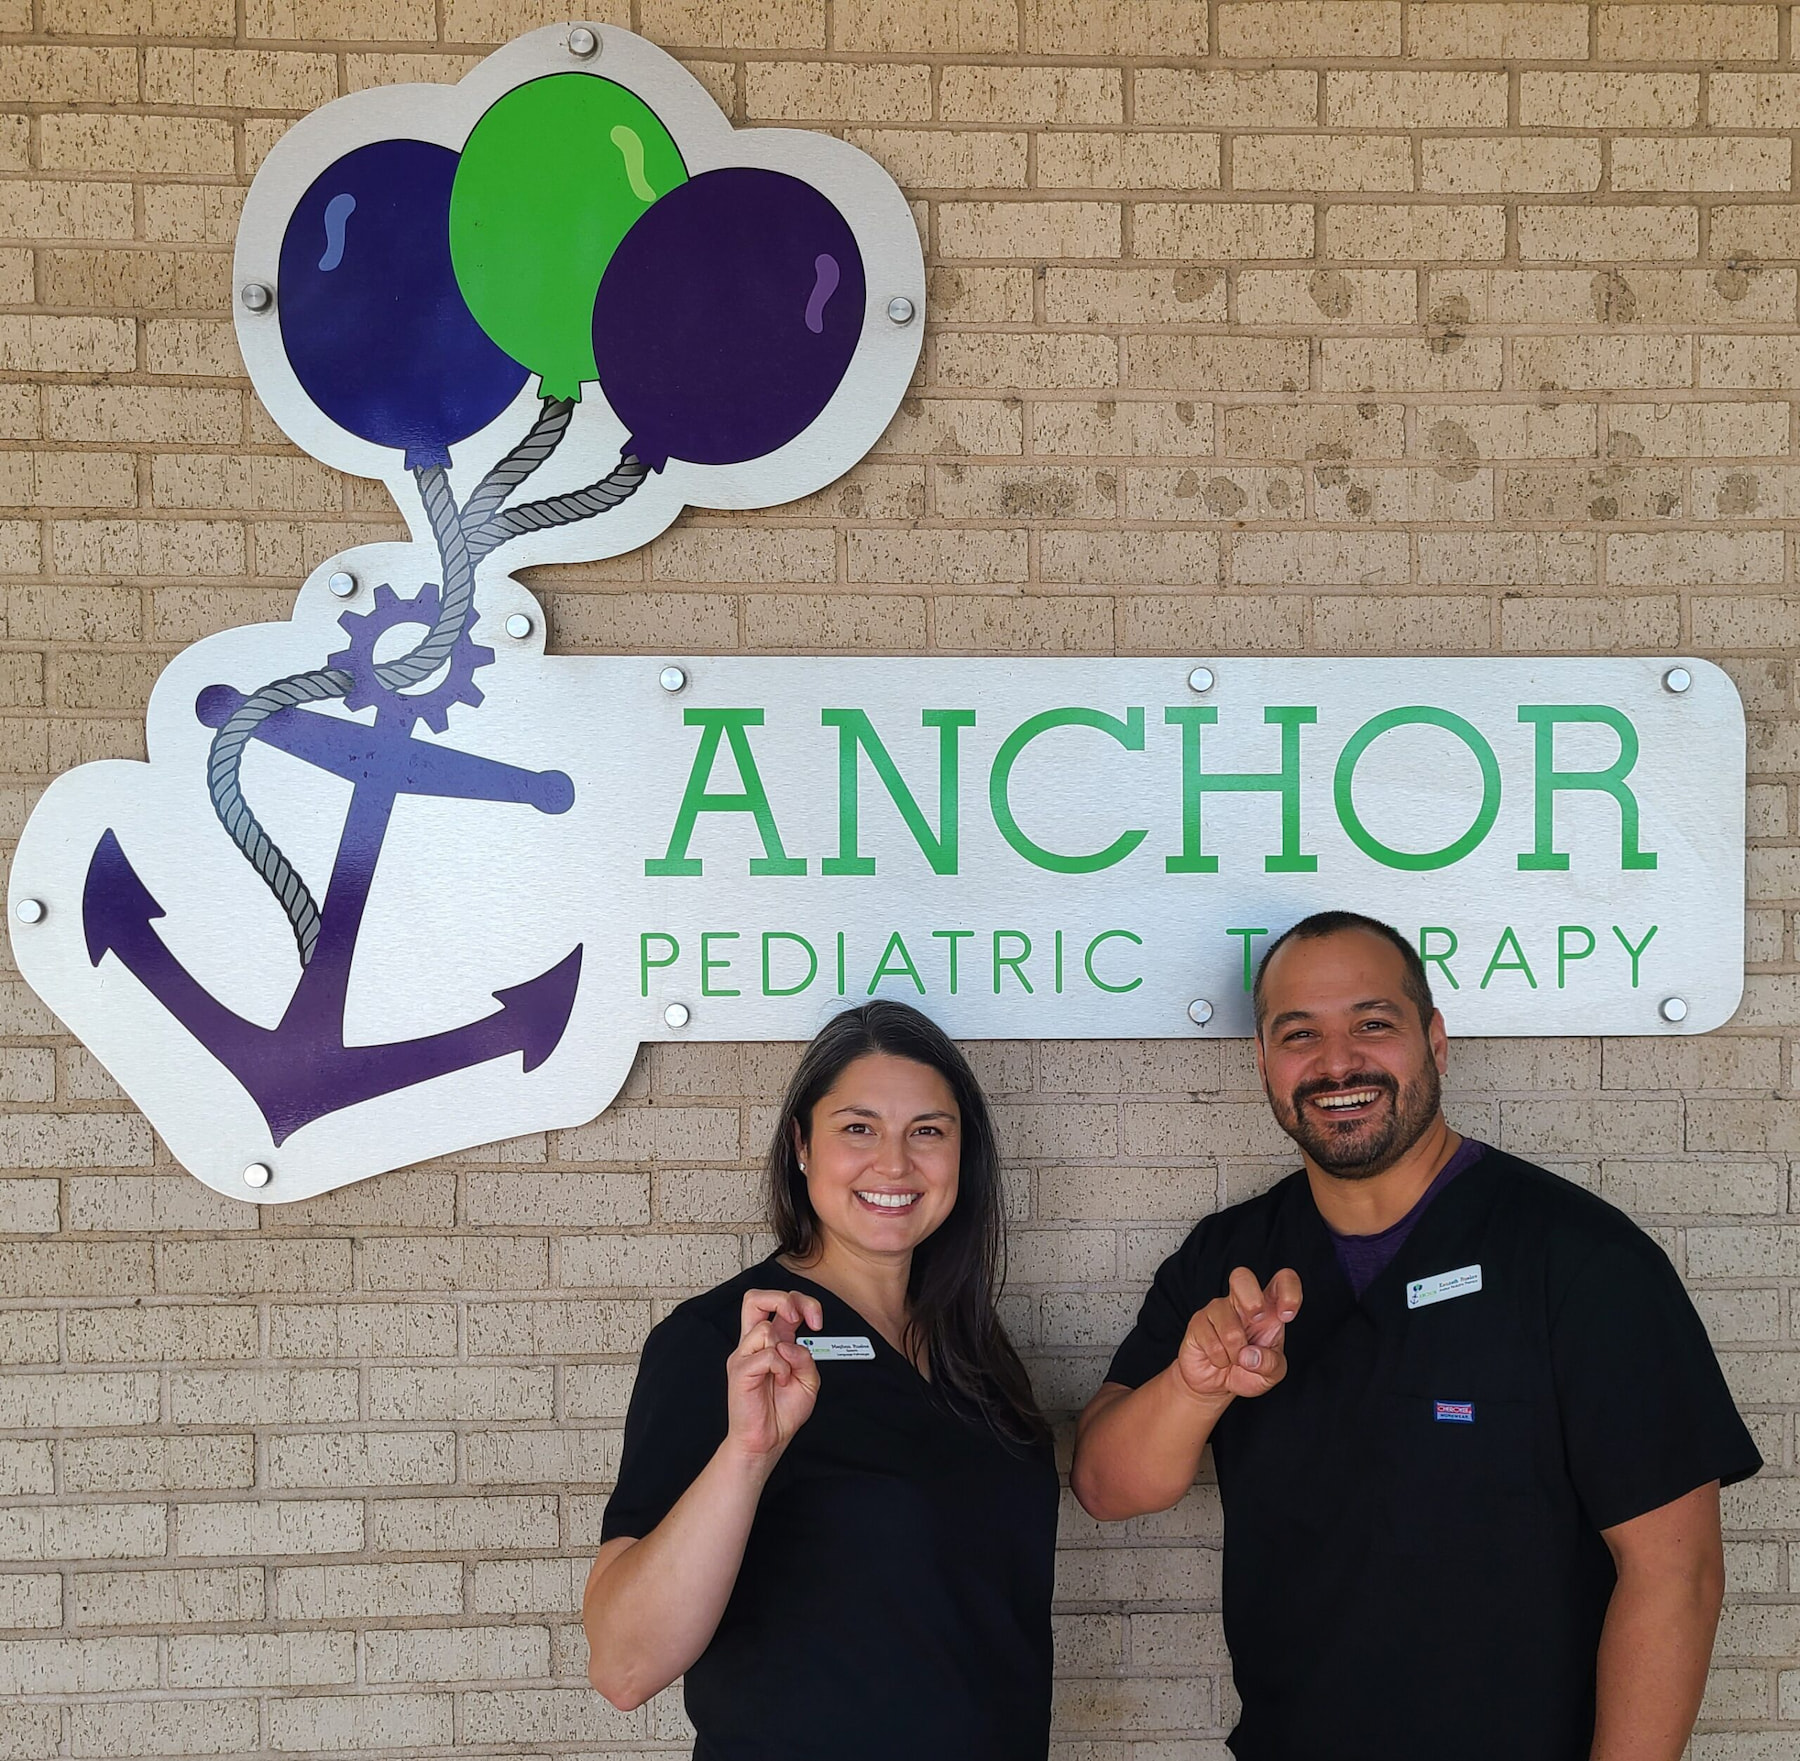 Meghan Ruelas ’07 MS, CCC-SLP and Kenneth Ruelas ’07 (’22 MBA) pose in front of their pediatric rehabilitation clinic, Anchor Pediatric Therapy, established in 2012 in Fort Worth, Texas. Photo provided by Meghan Ruelas.